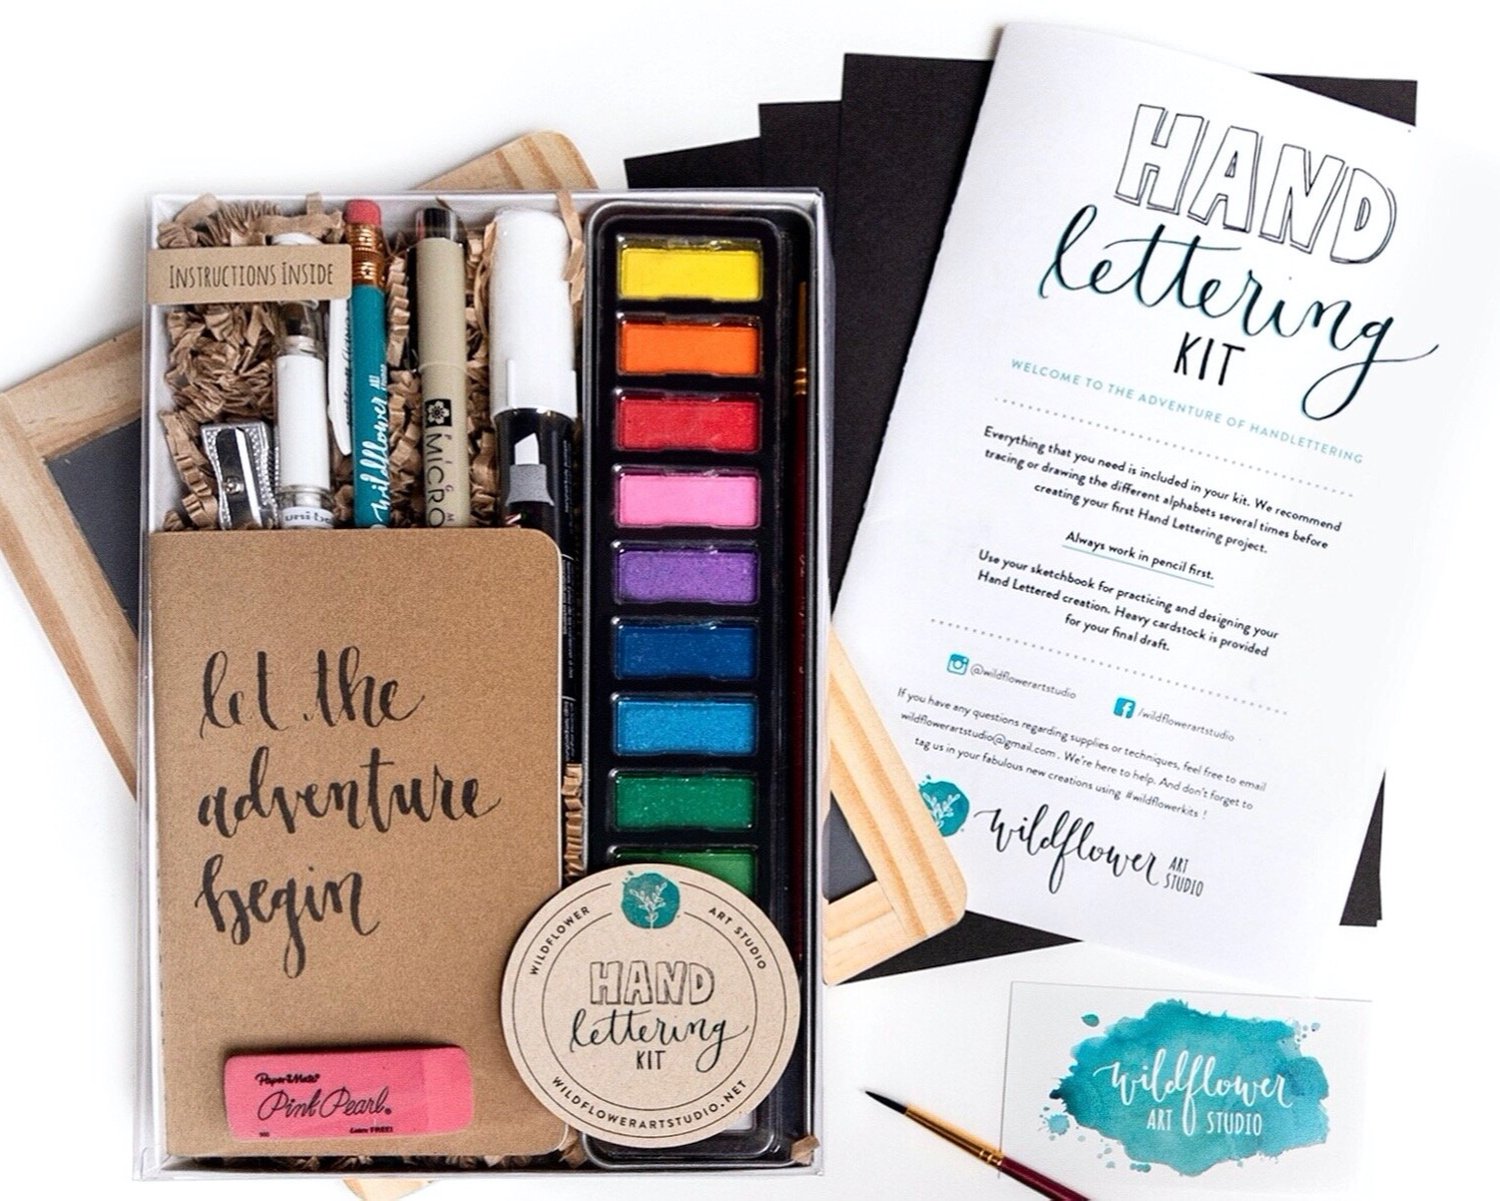 8 Essential Supplies & Resources for Your Hand Lettering Toolkit